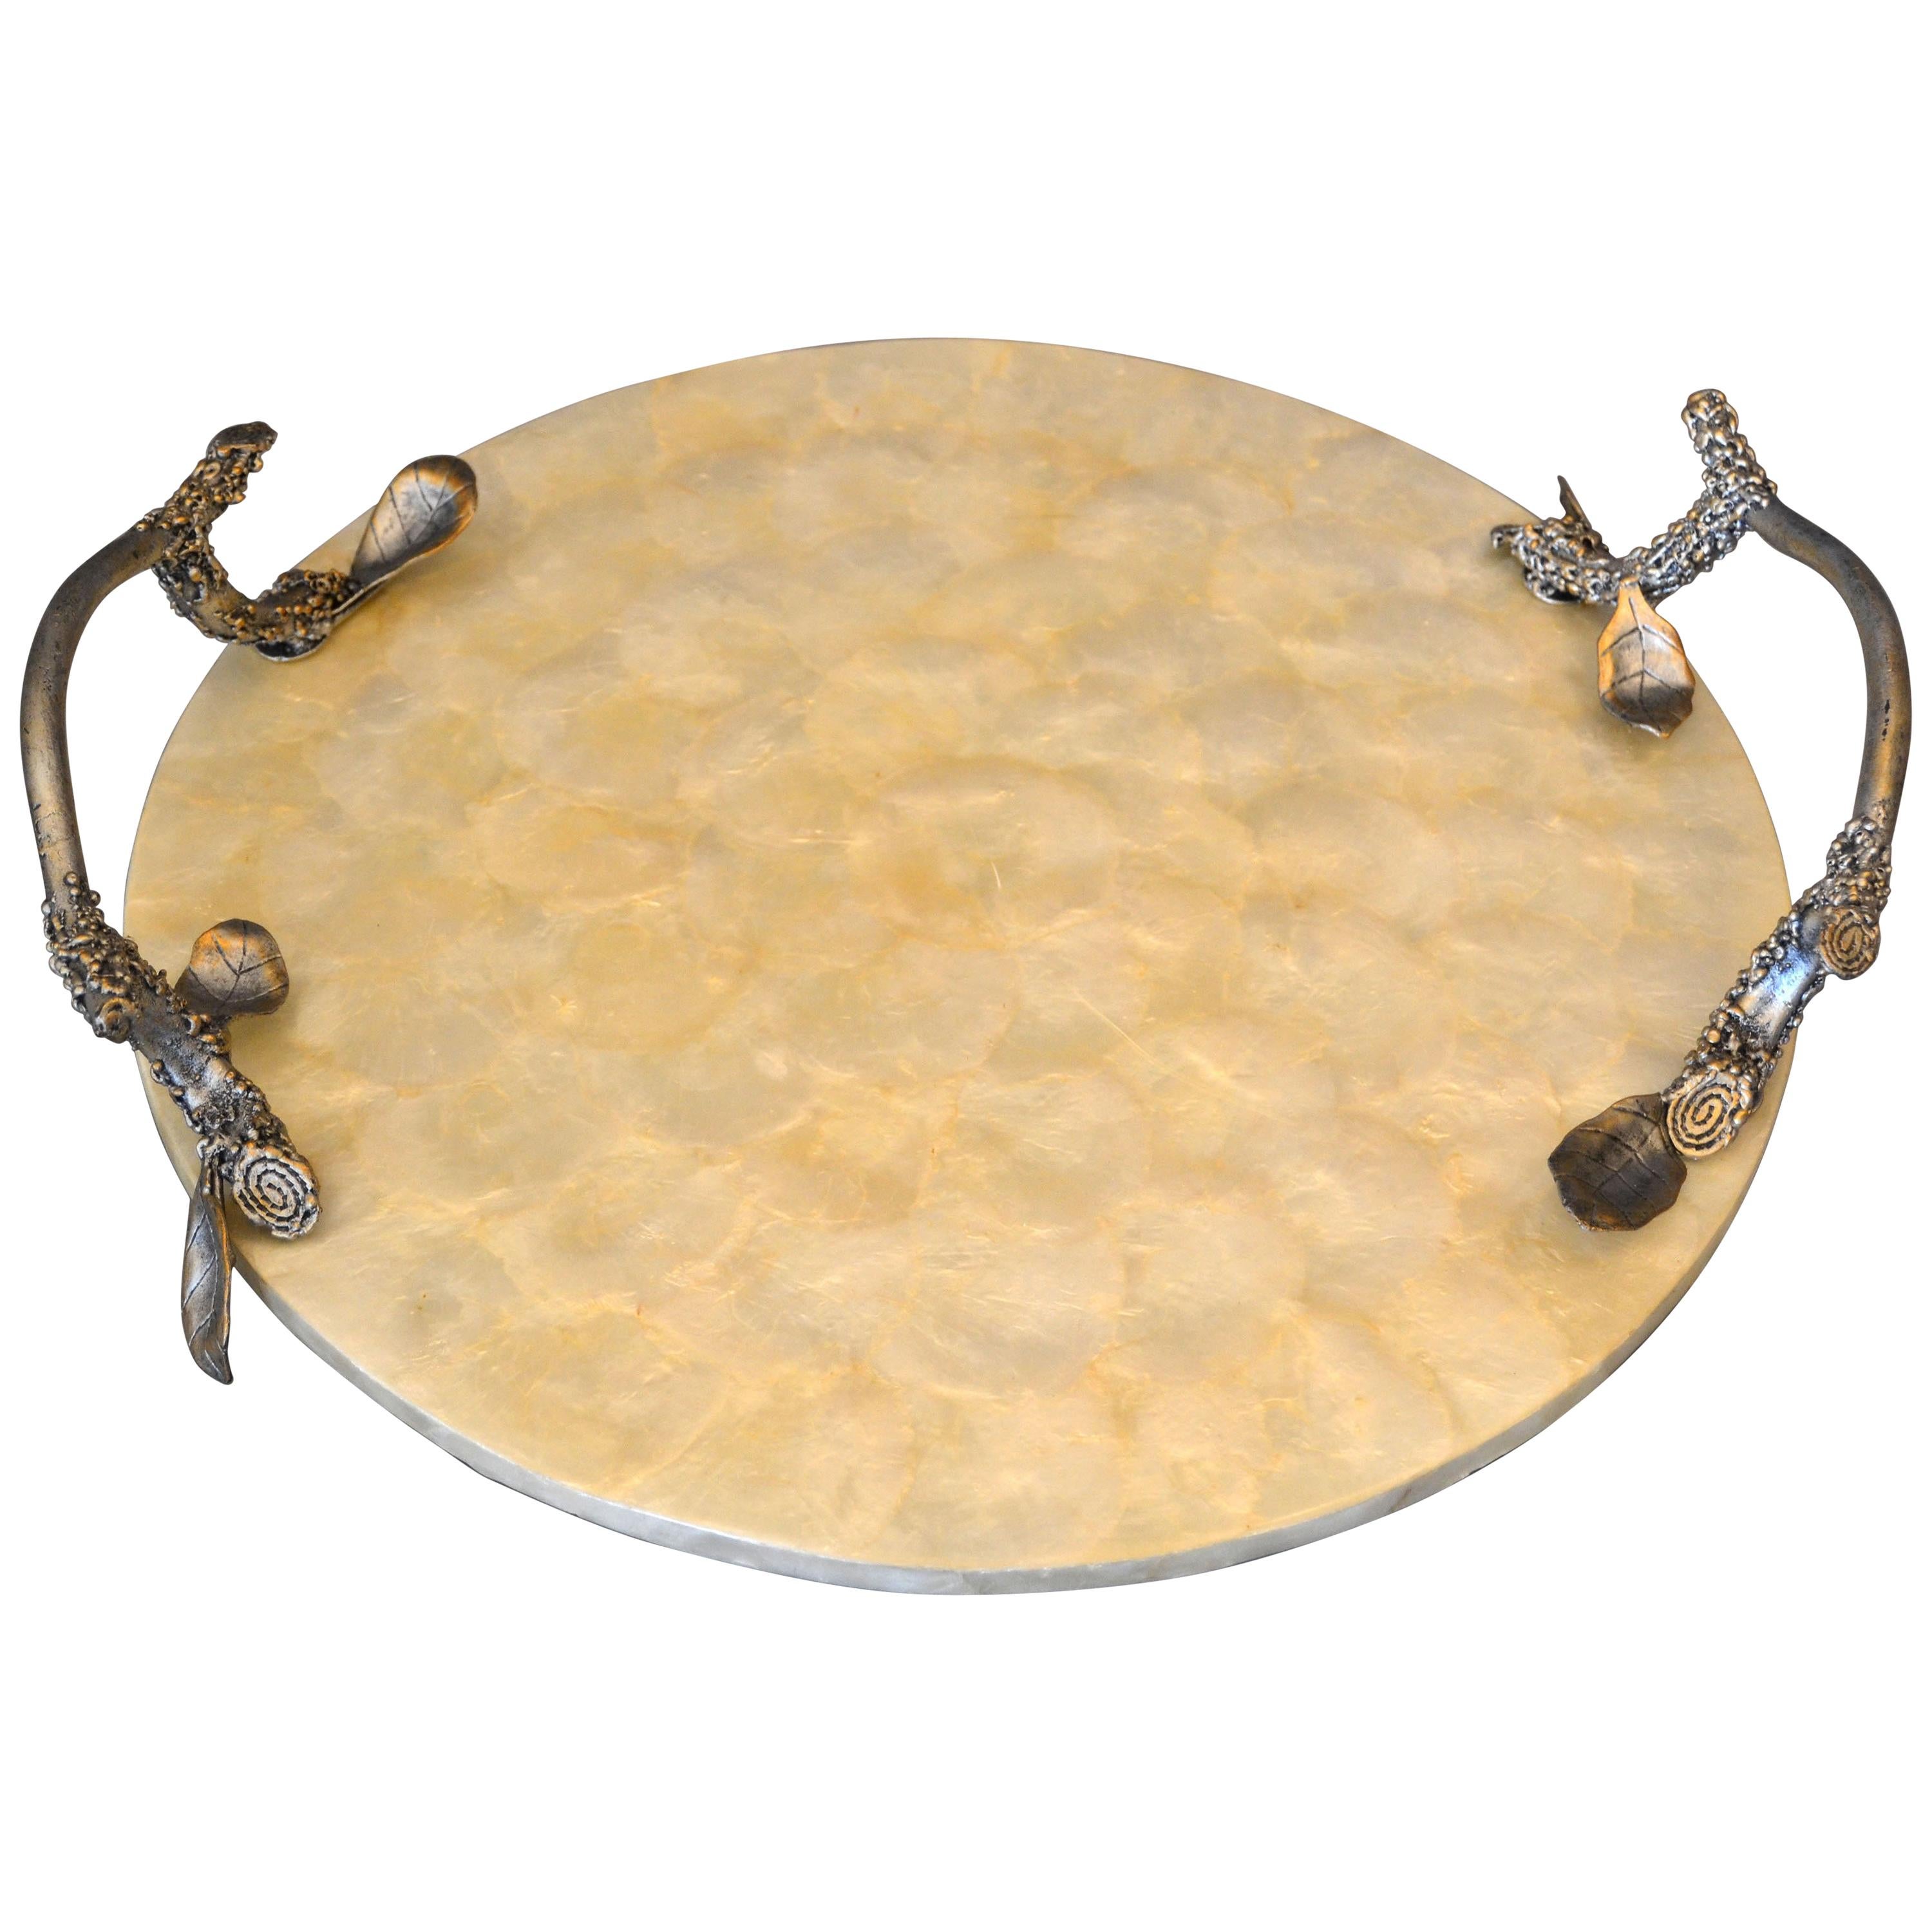 Modern Round Capiz Shell and Pewter Branch Handles Decorative Tray, Serving Tray